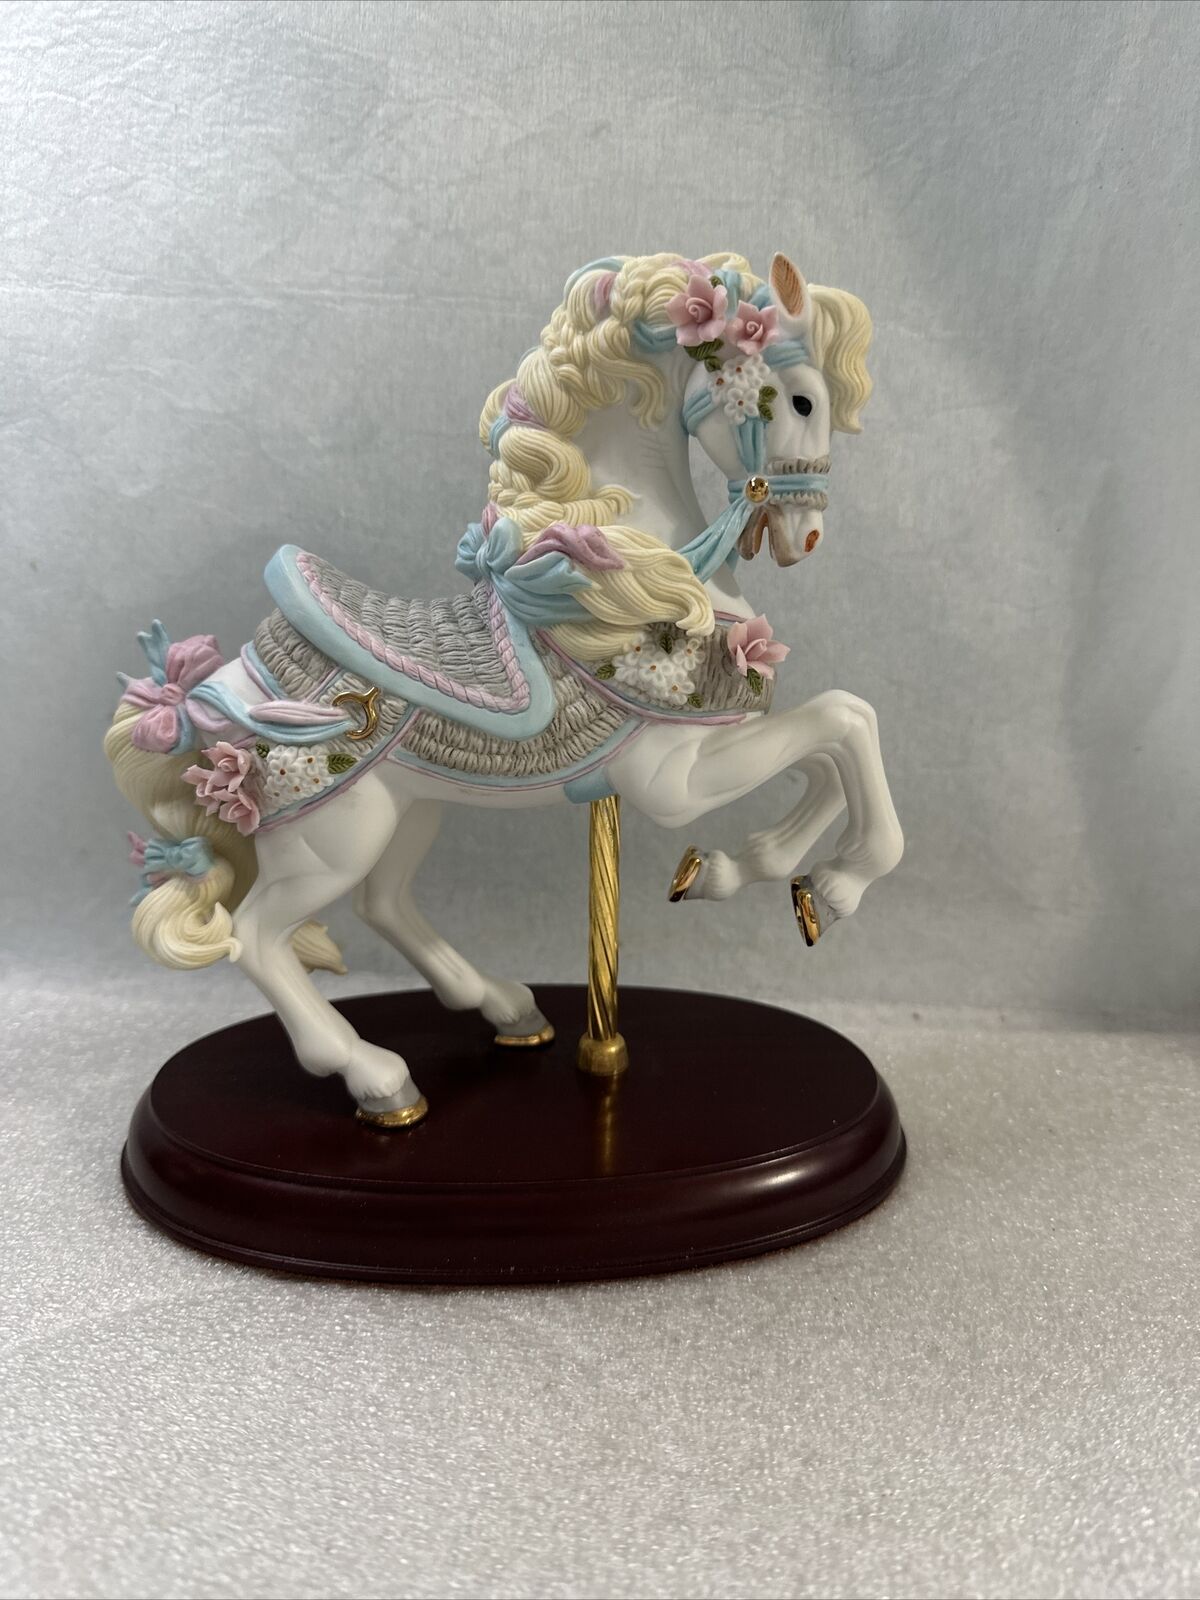 1987 Lenox Carrousel Show Horse 1st in the Series